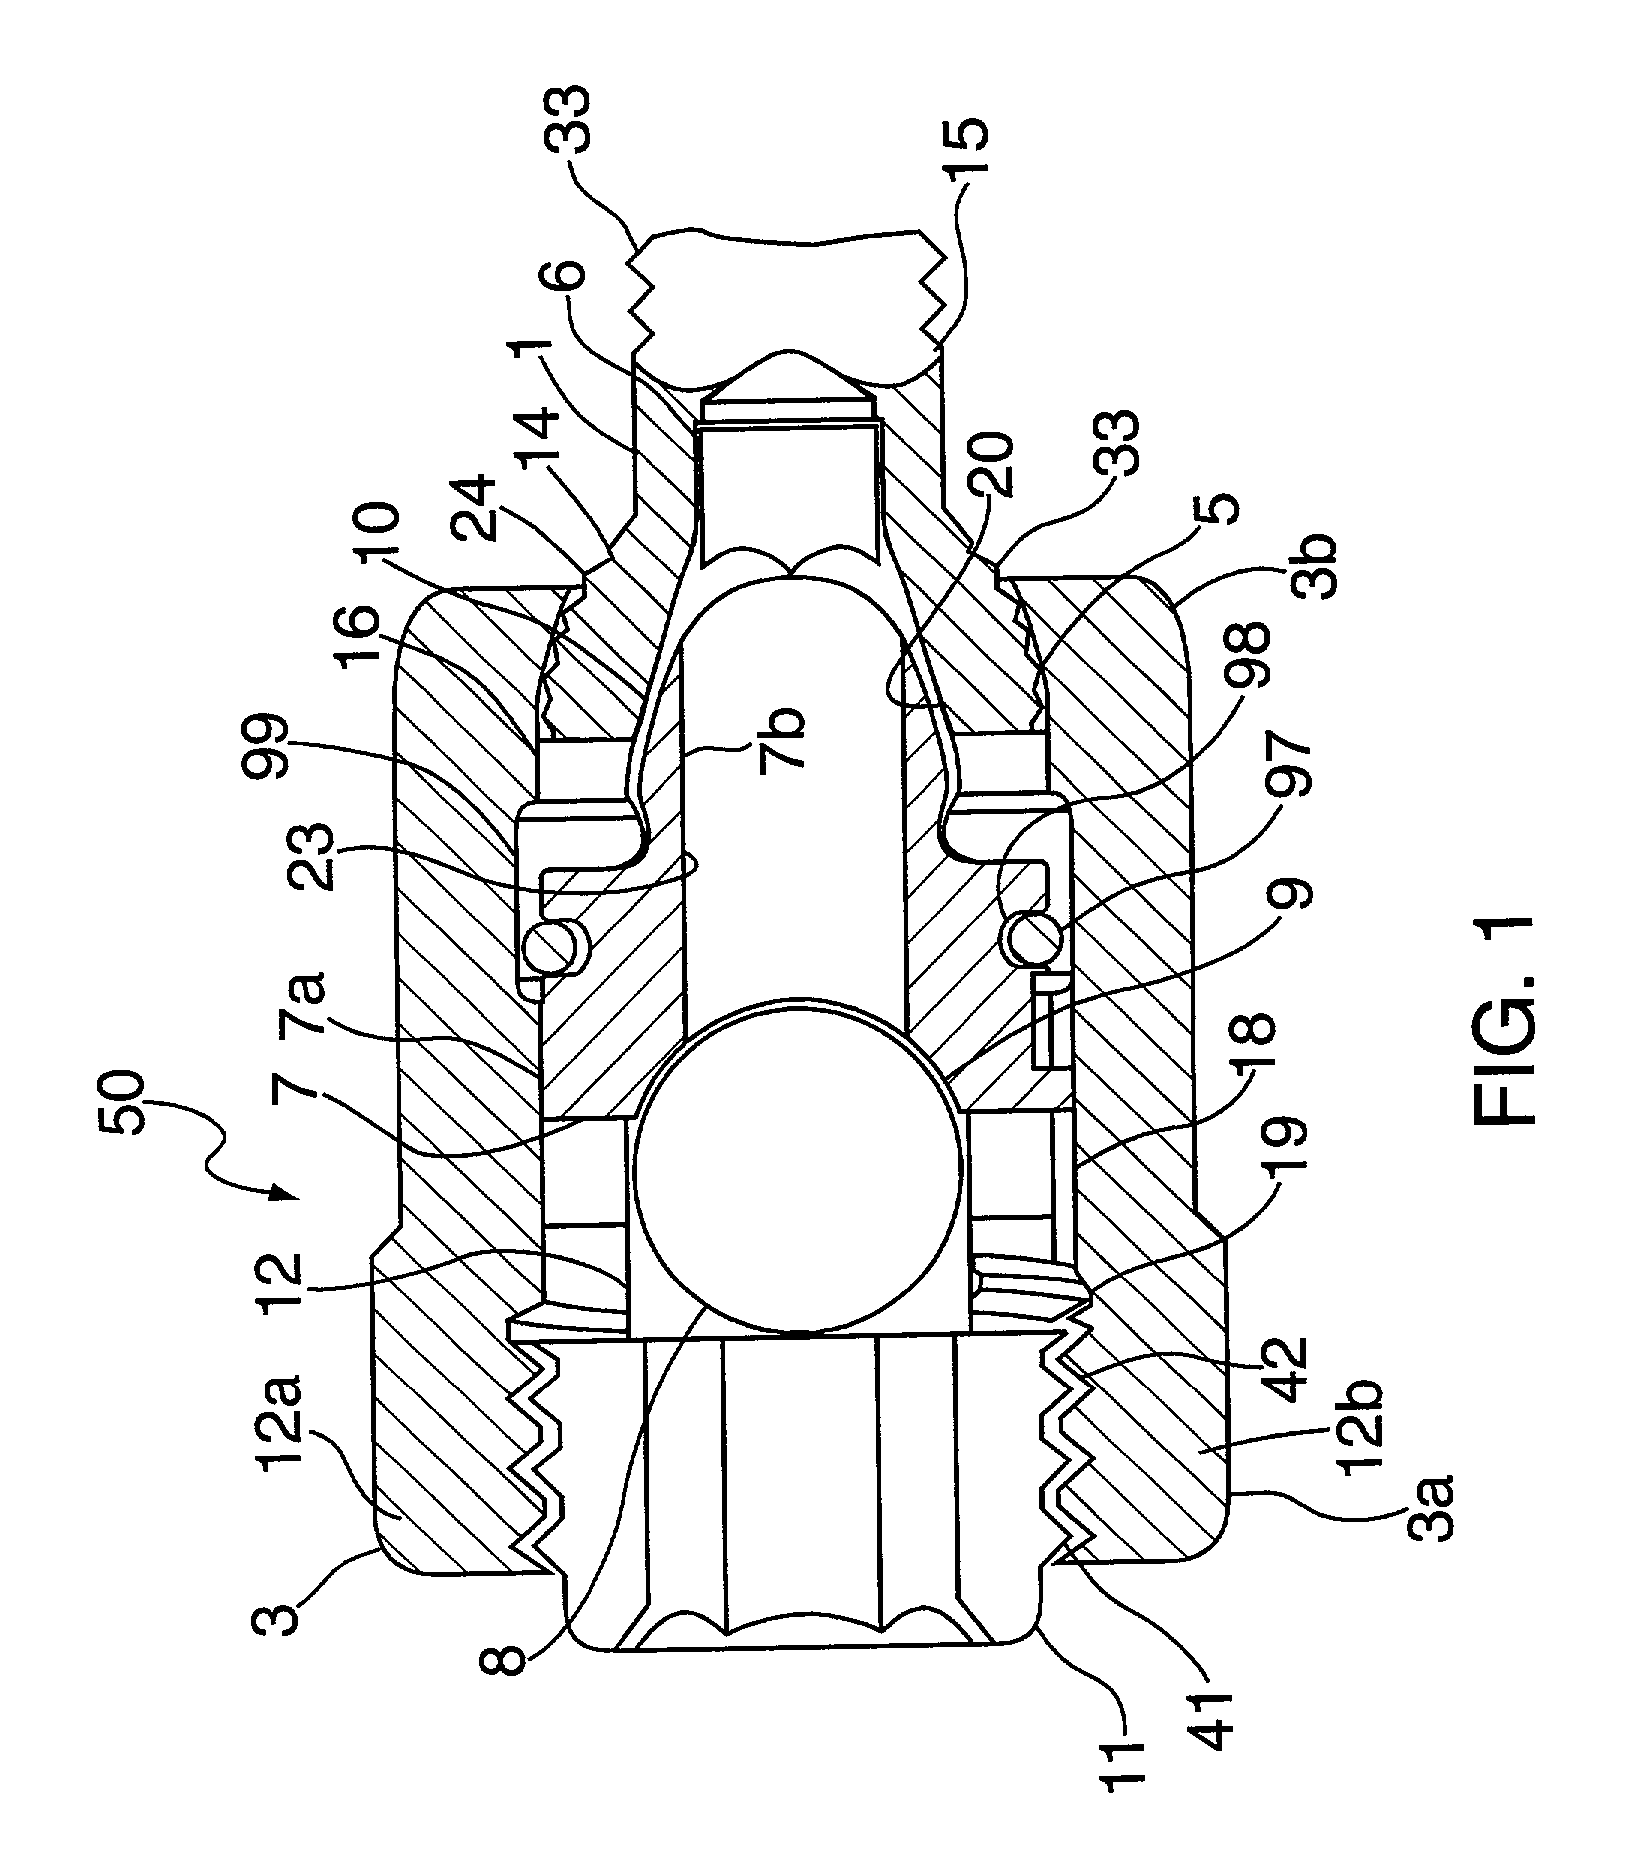 Surgical screw system and related methods